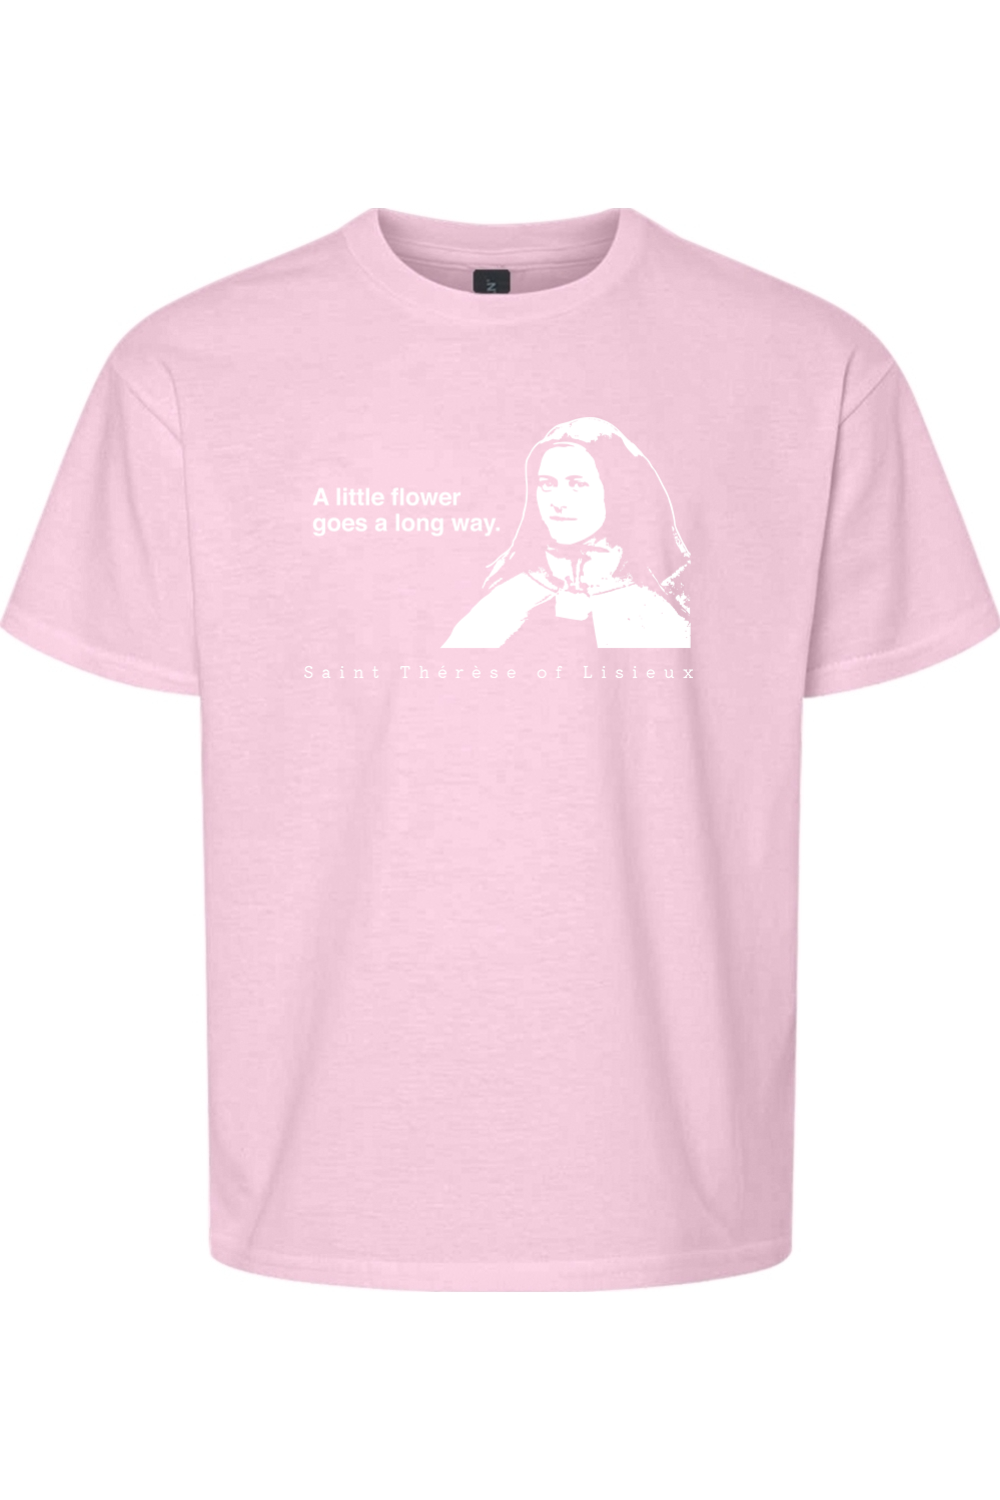 A Little Flower Goes a Long Way - St. Thérèse of Lisieux Youth T-Shirt